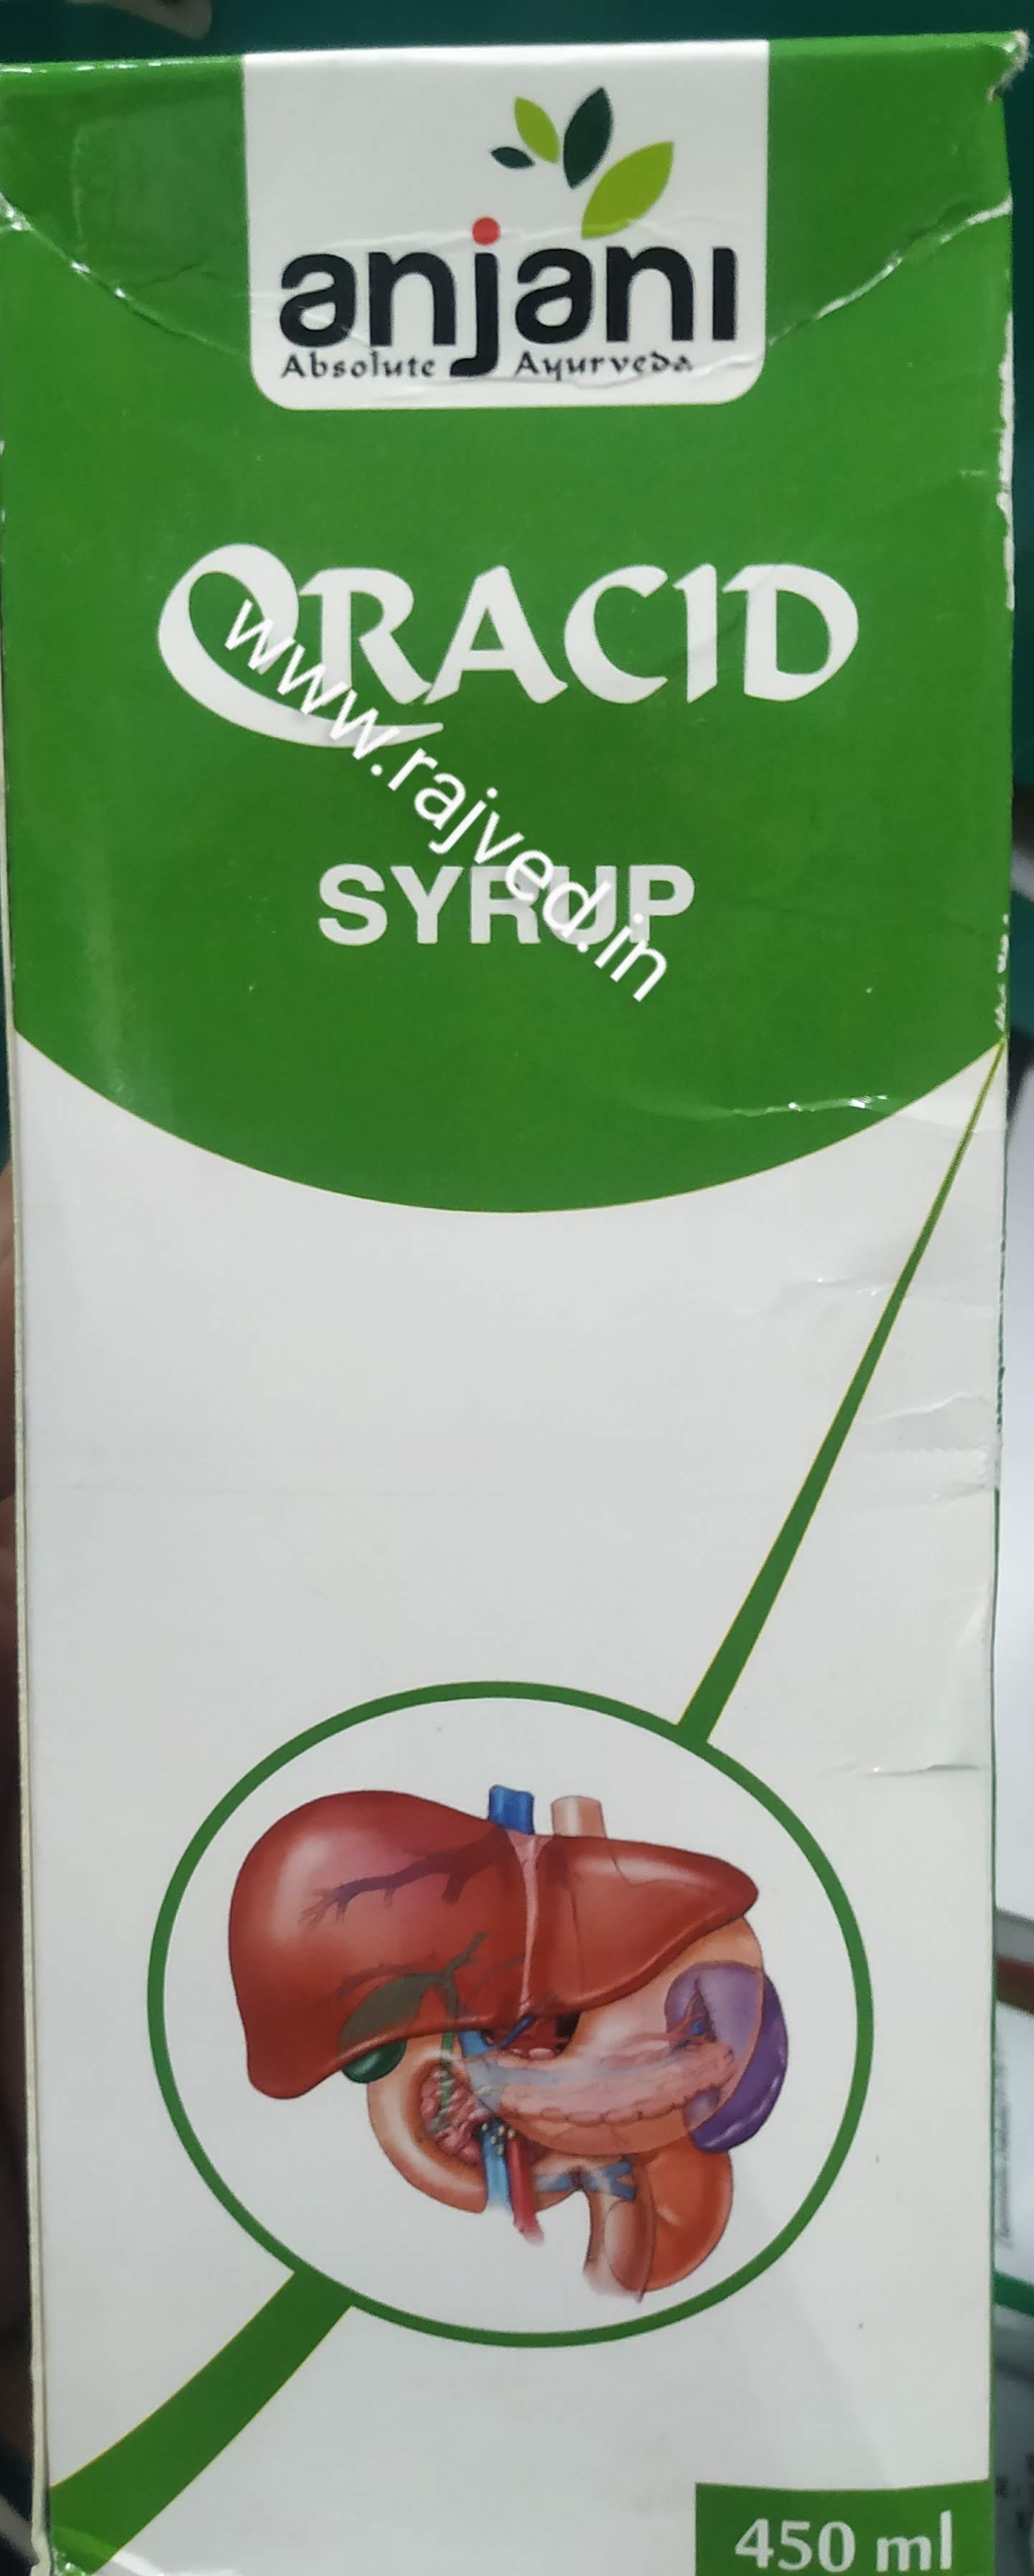 qracid syrup 450 ml upto 20% off anjali pharmaceuticals